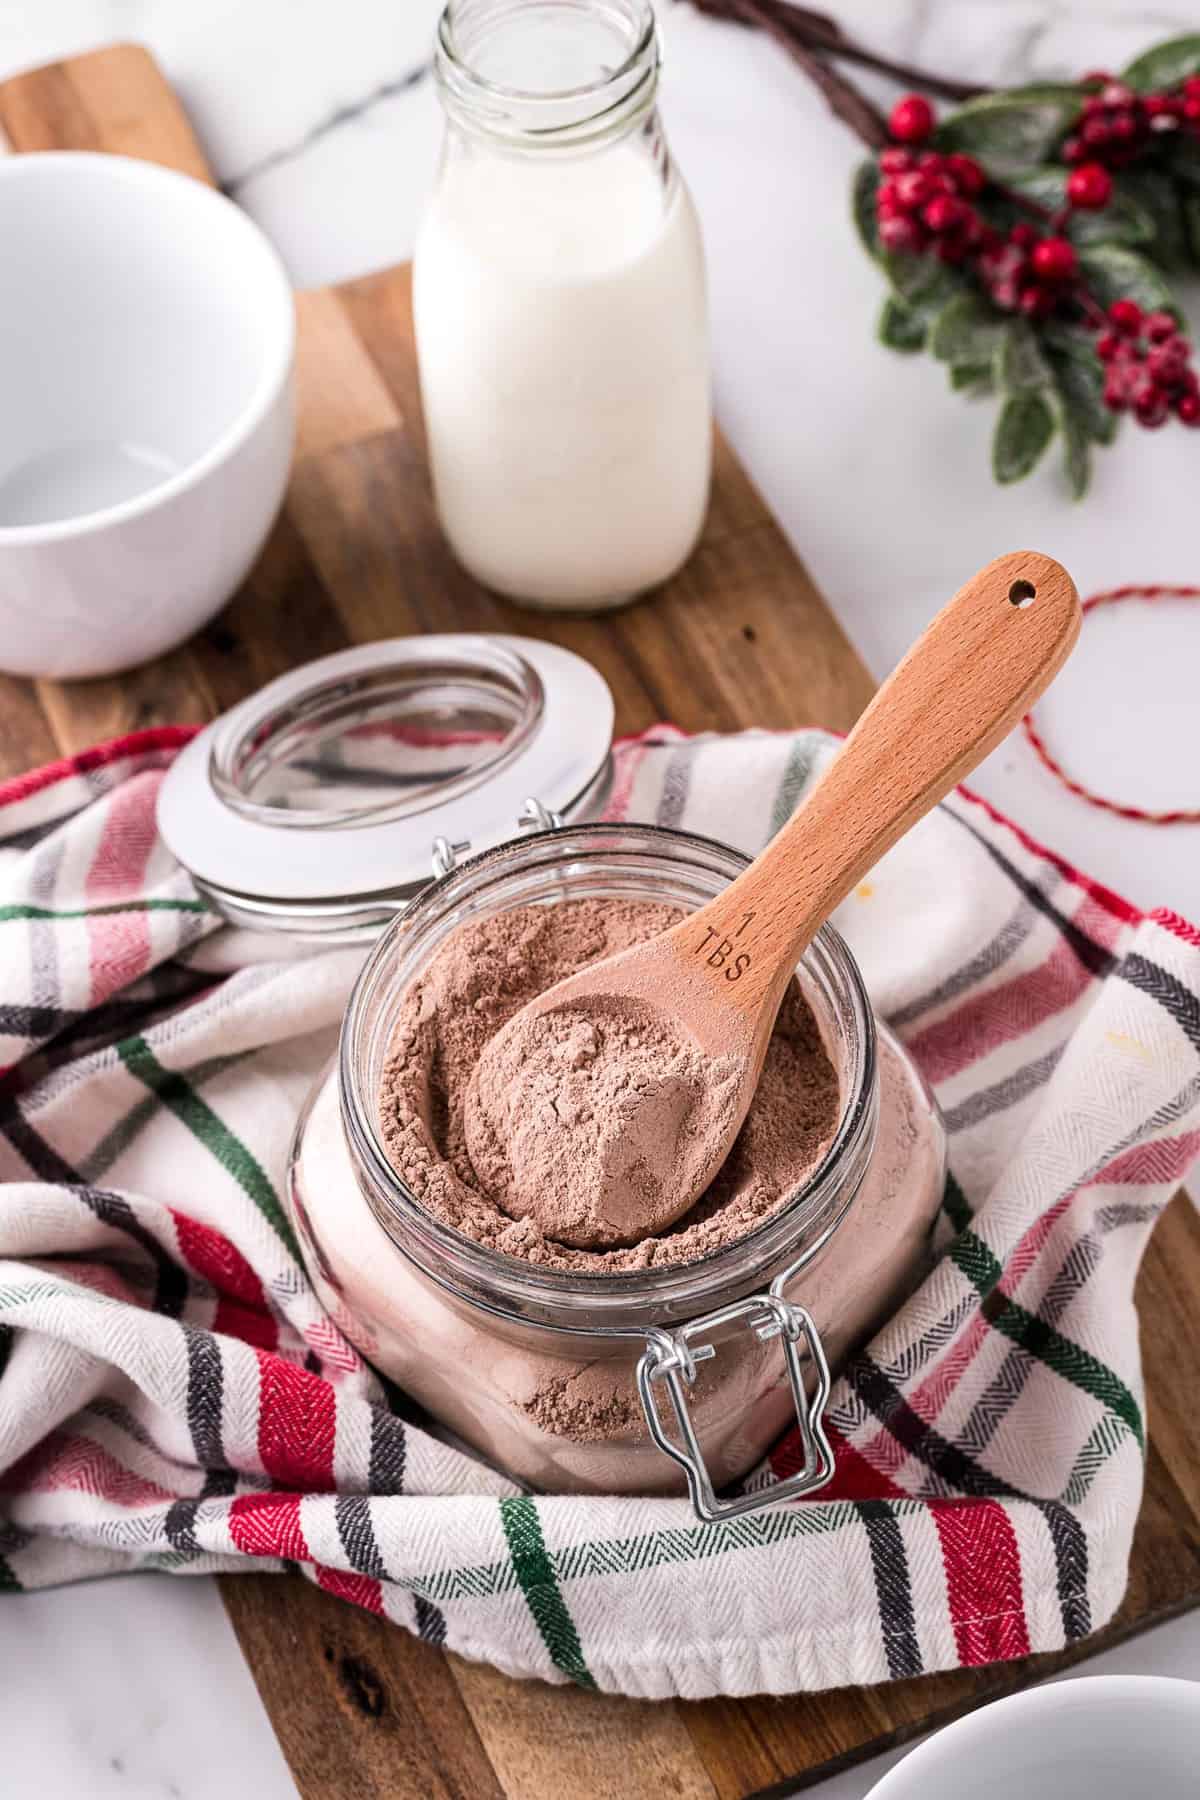 Hot cocoa mix in a small glass jar with a wooden spoon.